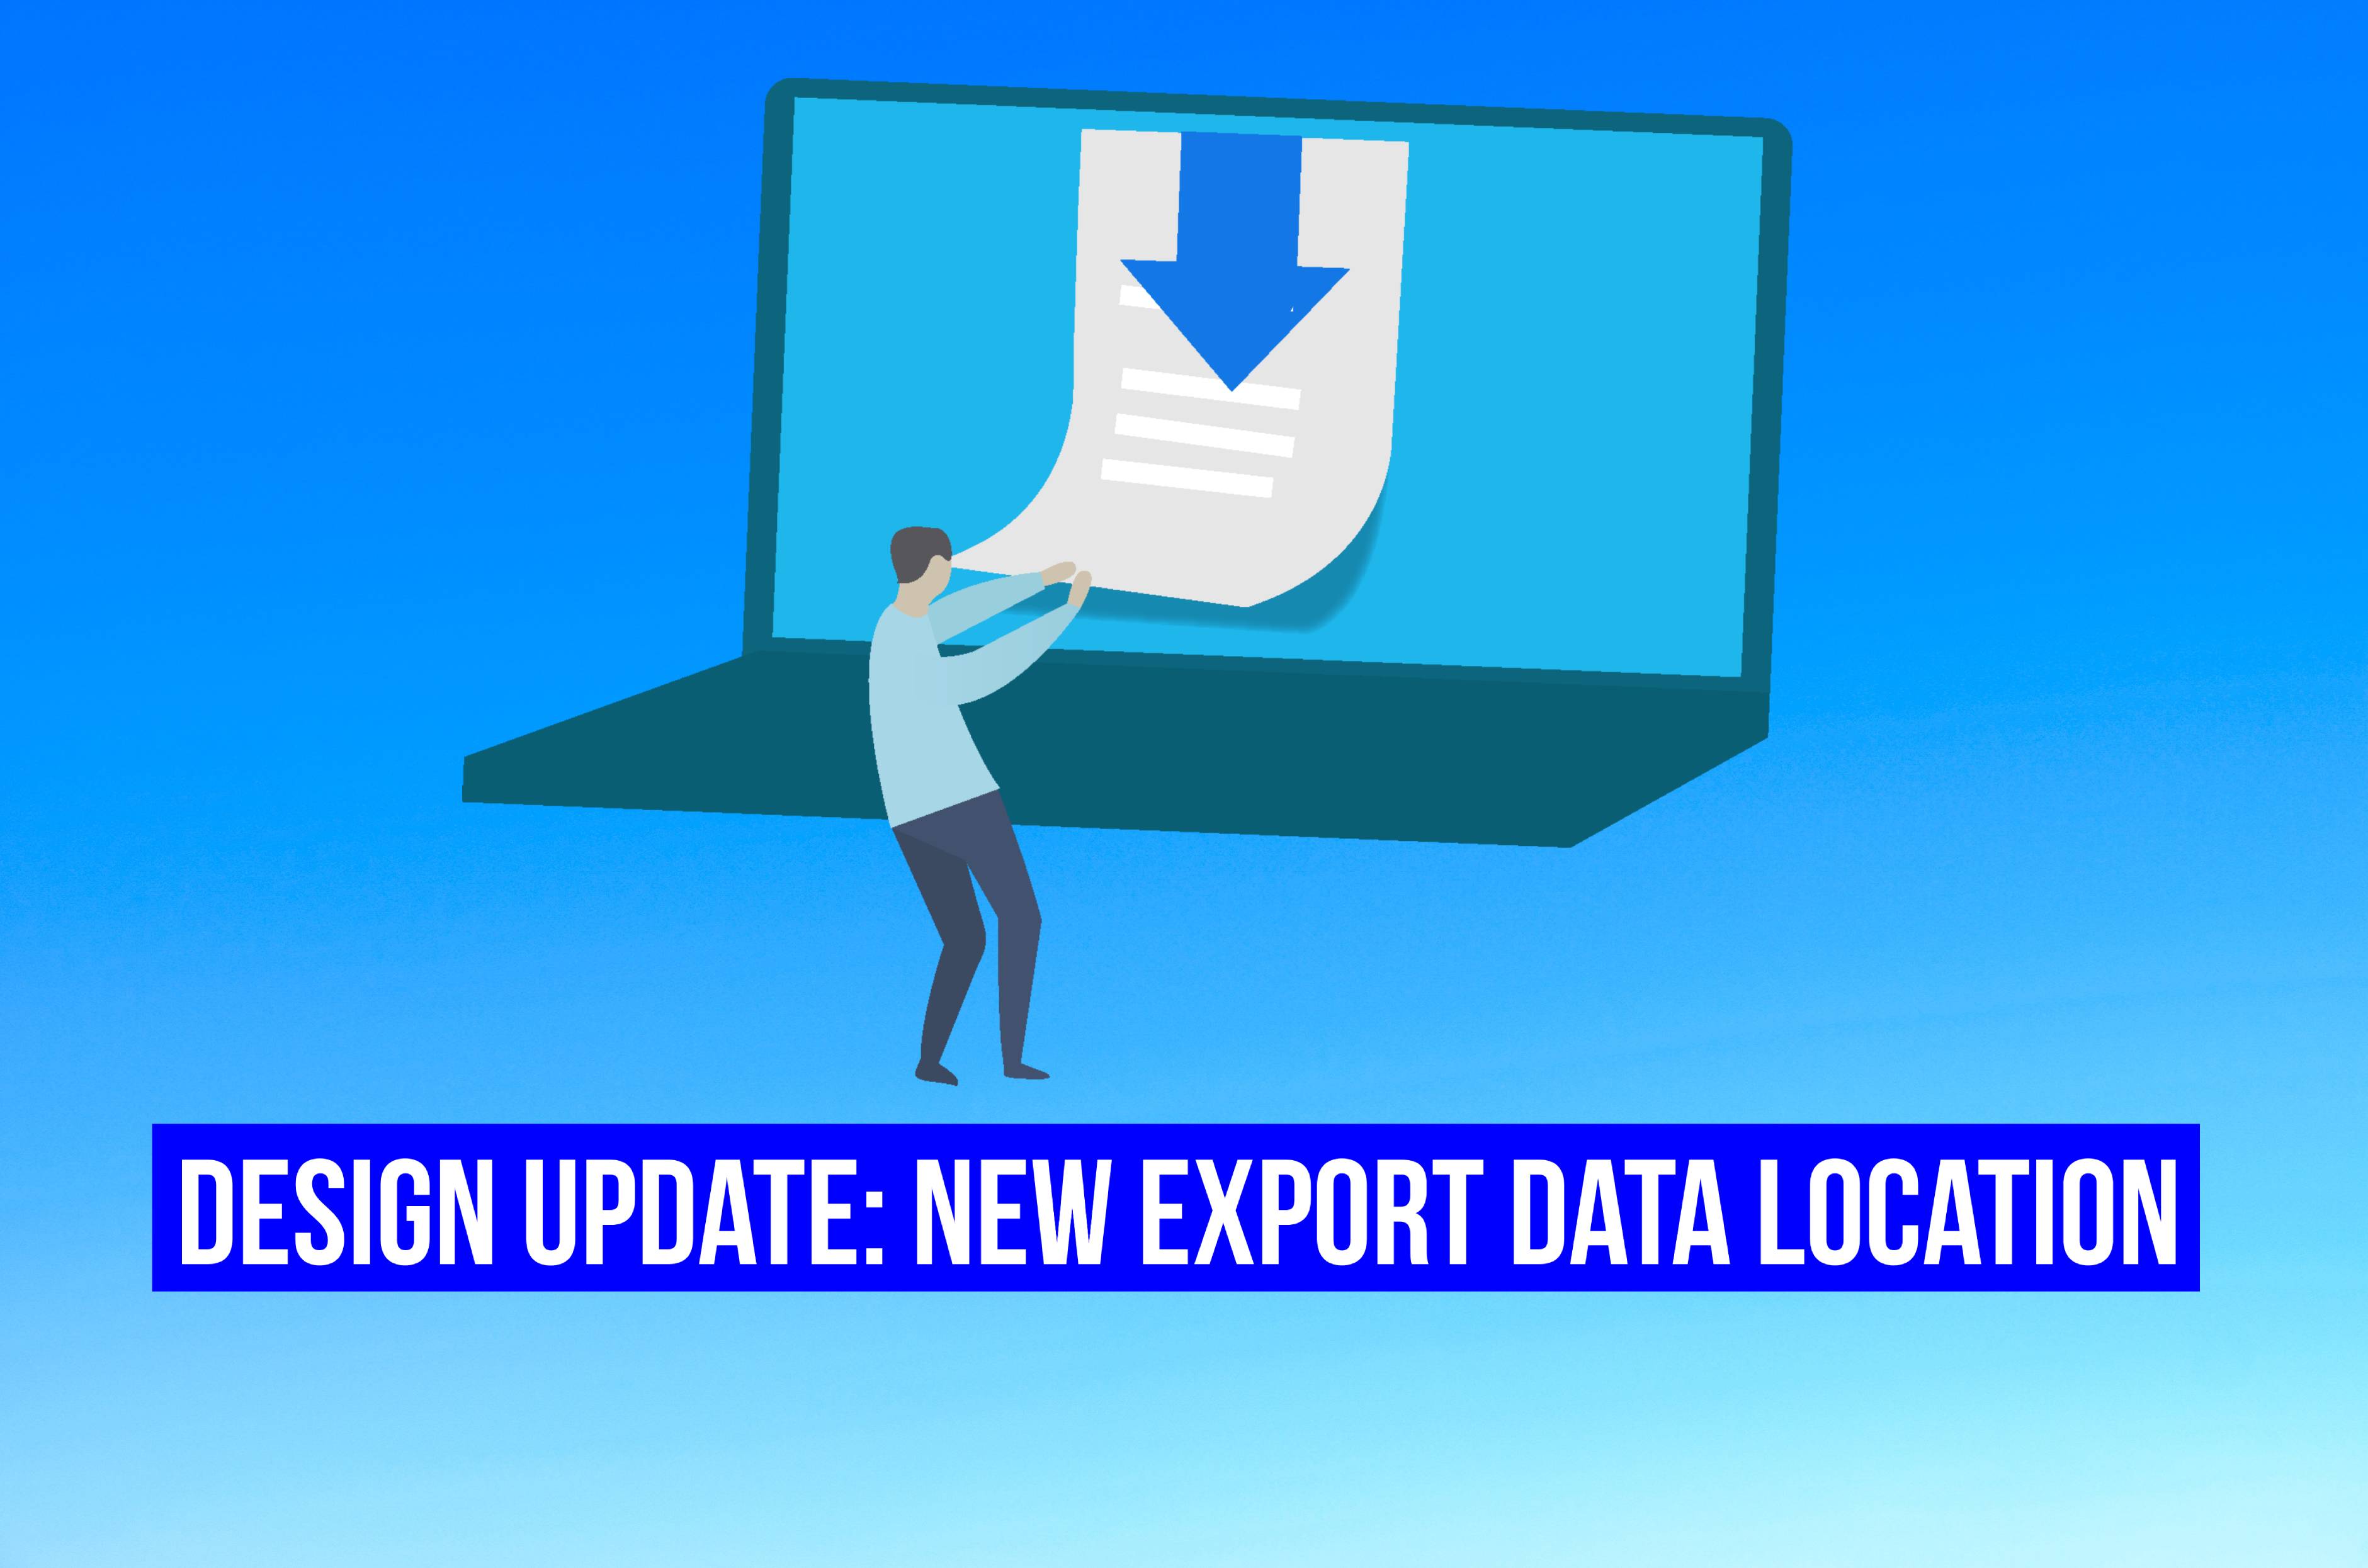 New export data location title image